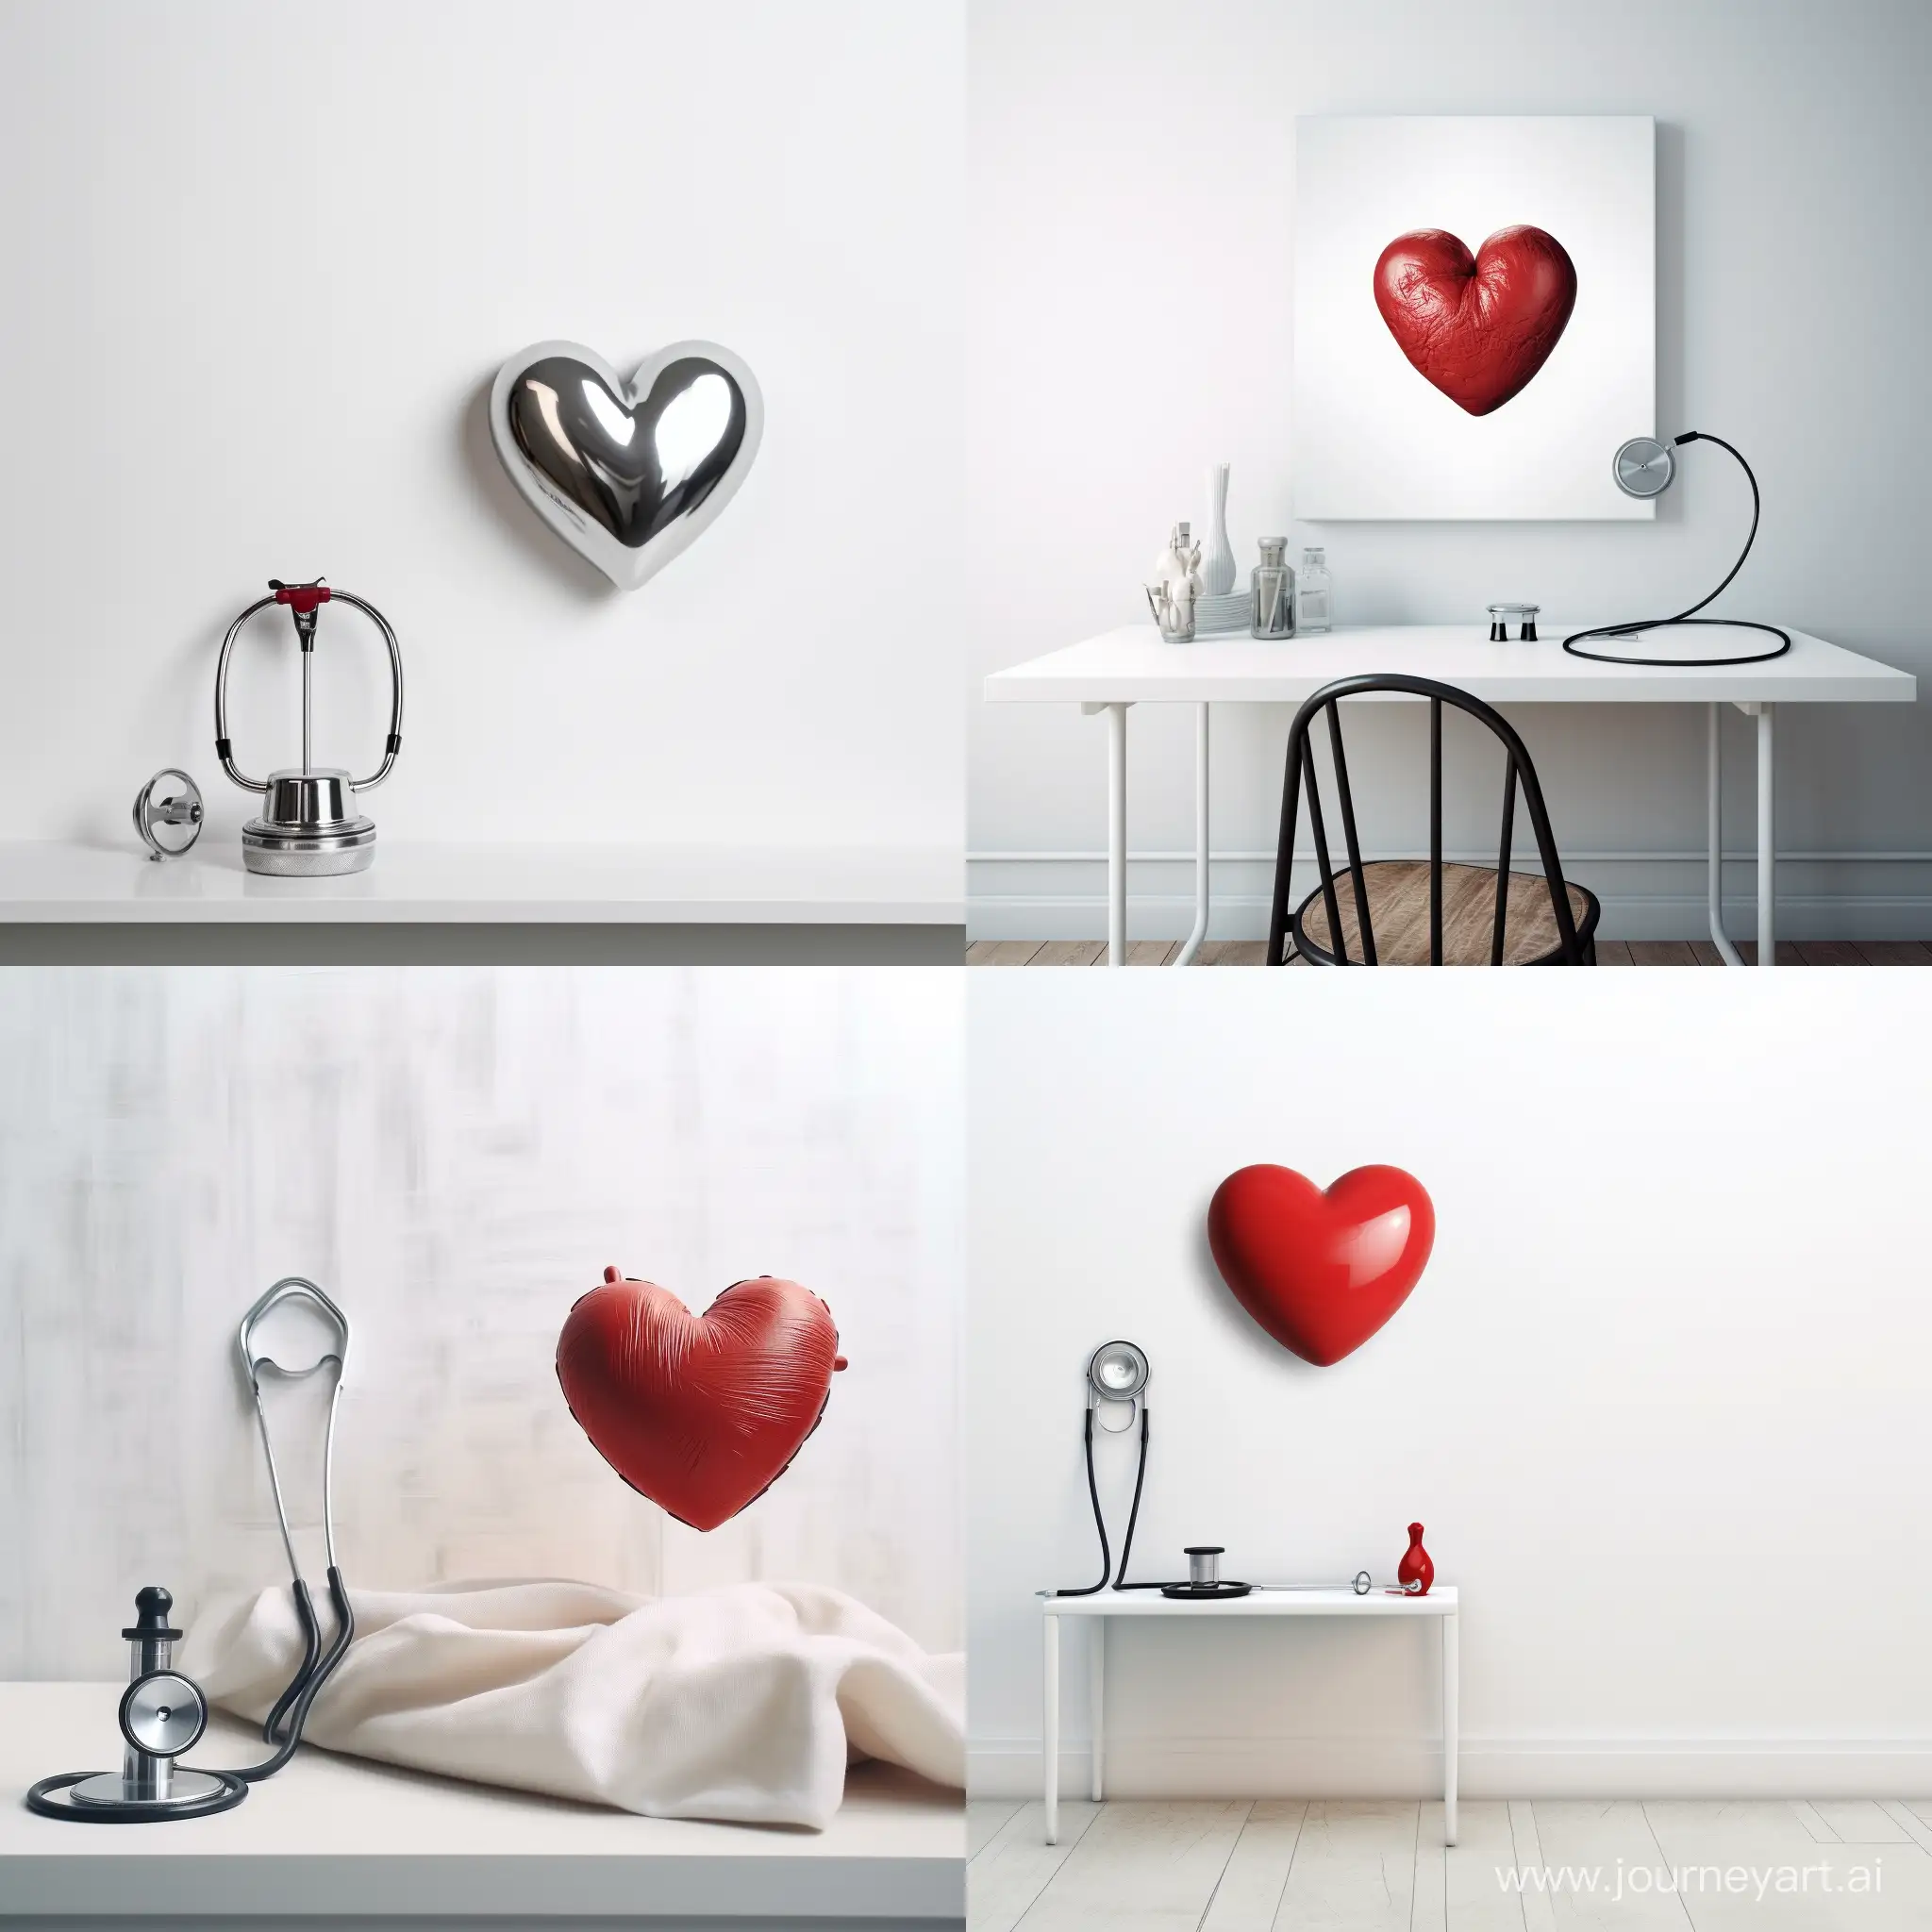 stethoscope, heart, white background. on the table, white wall